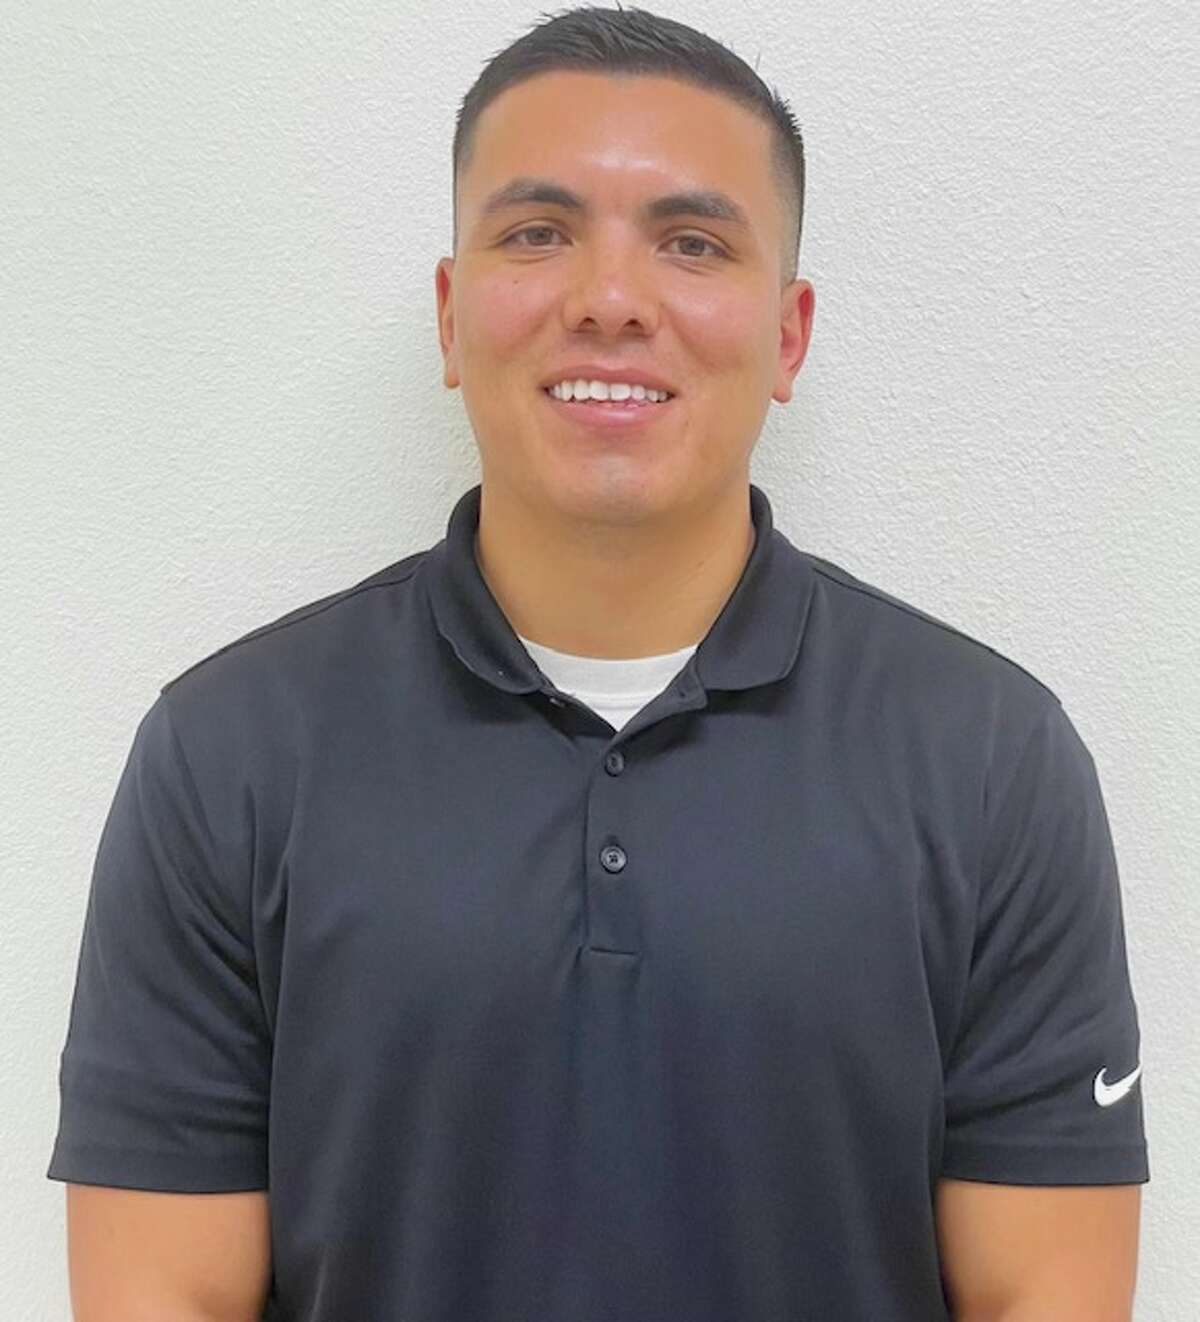 Hernandez was announced as the head men’s soccer coach July 11 in a Facebook post on Plainview ISD’s page.  